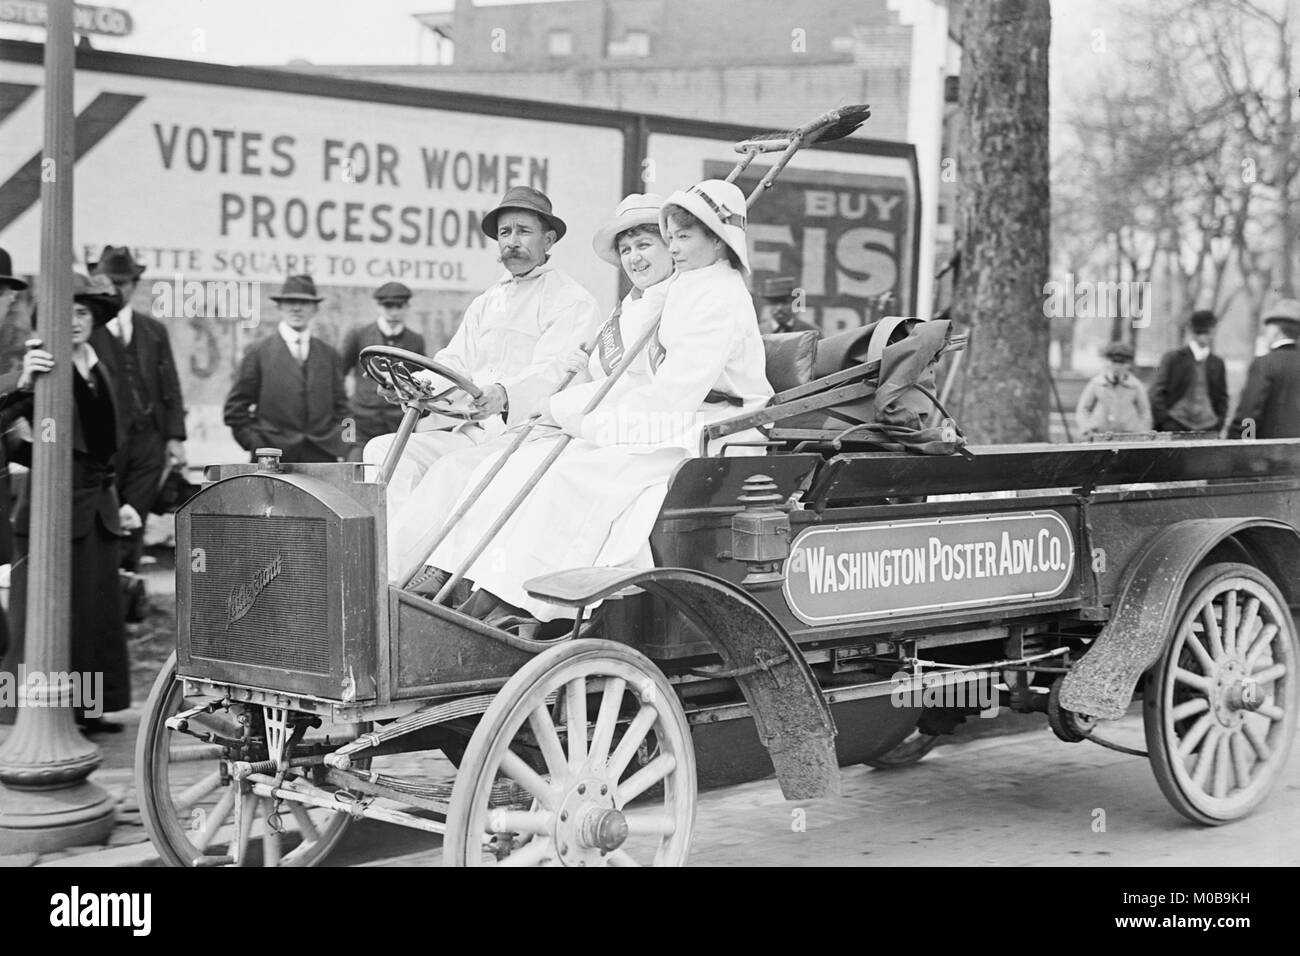 Washington poster Advertising Company Truck Carries Suffragettes Stock Photo